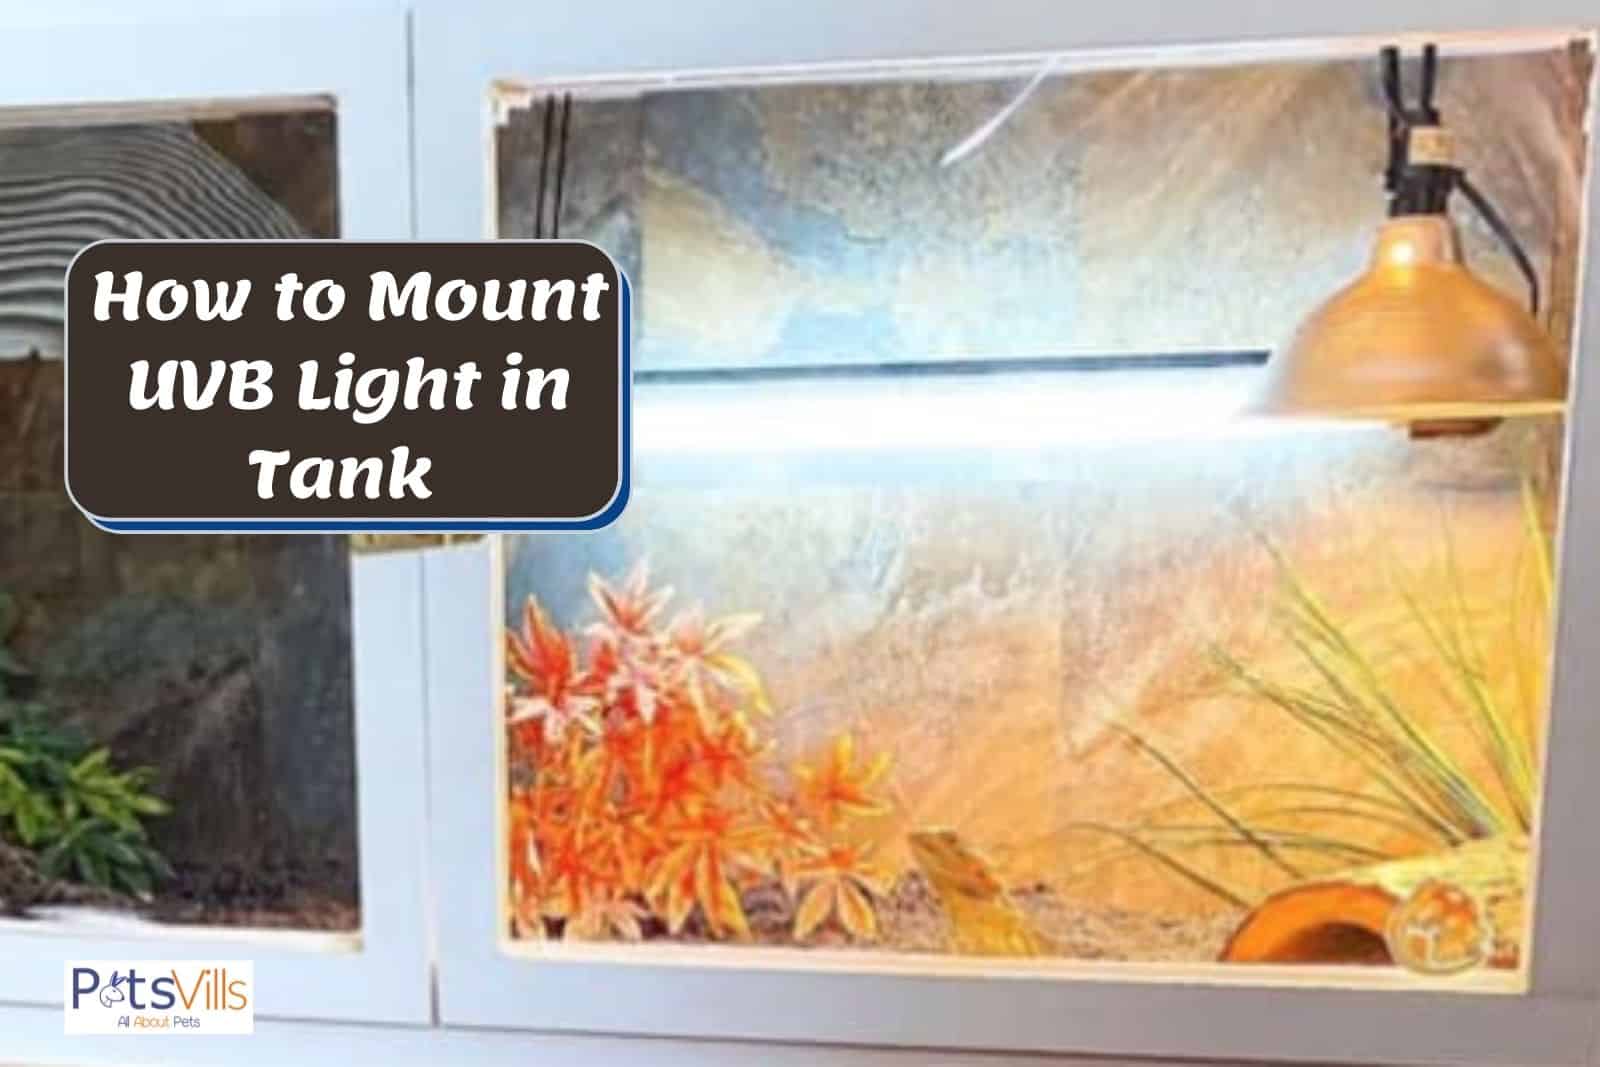 picture of a bearded dragon tank beside How to Mount UVB Light in Tank text